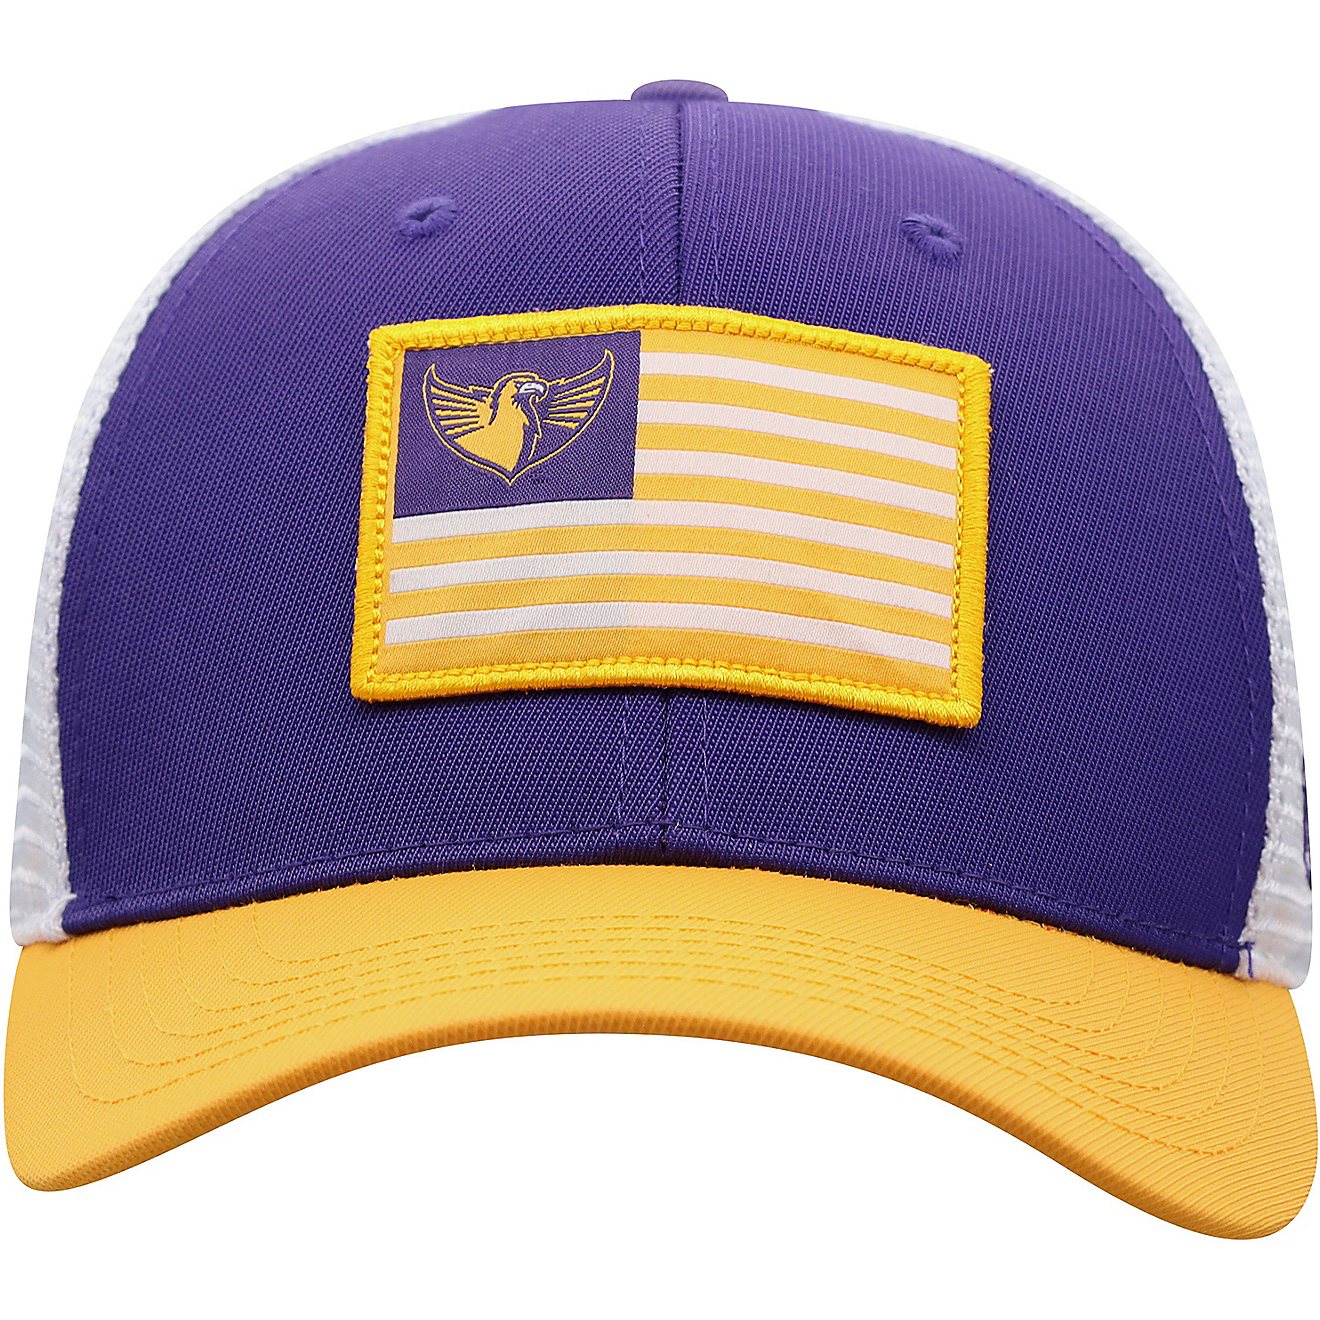 Top of the World Men's Tennessee Tech University Pedigree One Fit Cap                                                            - view number 2